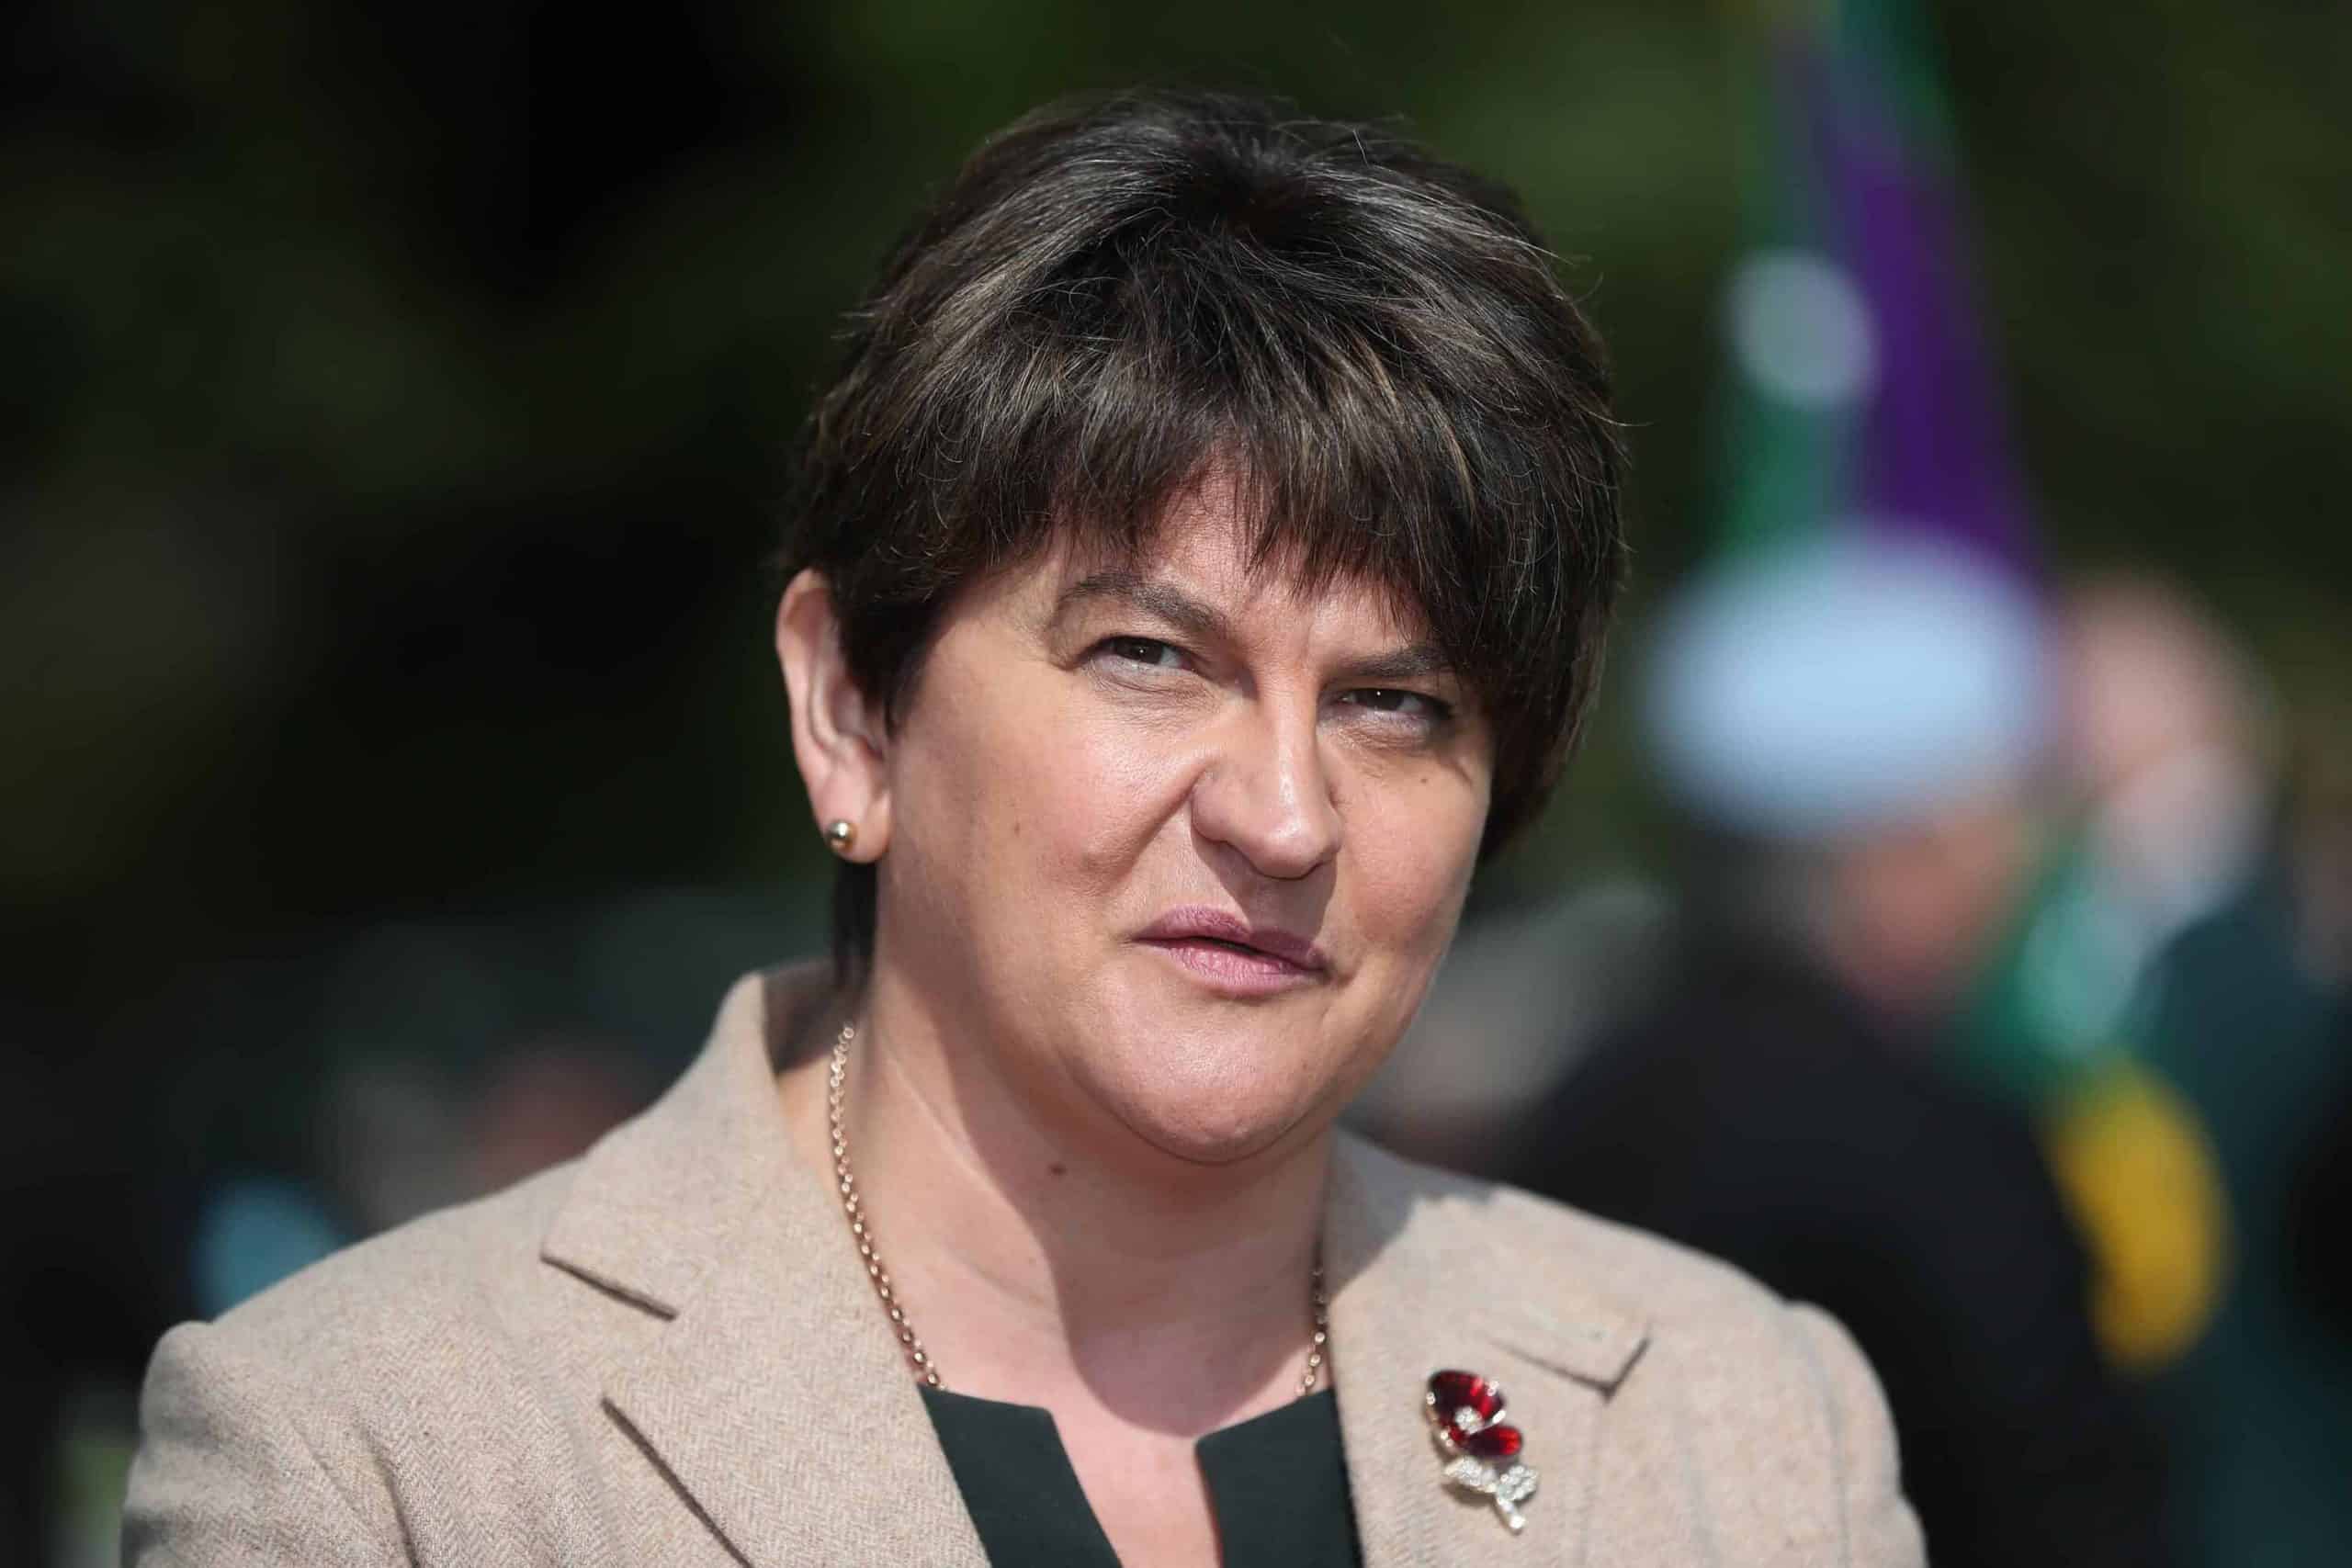 DUP welcomes decision to suspend Parliament